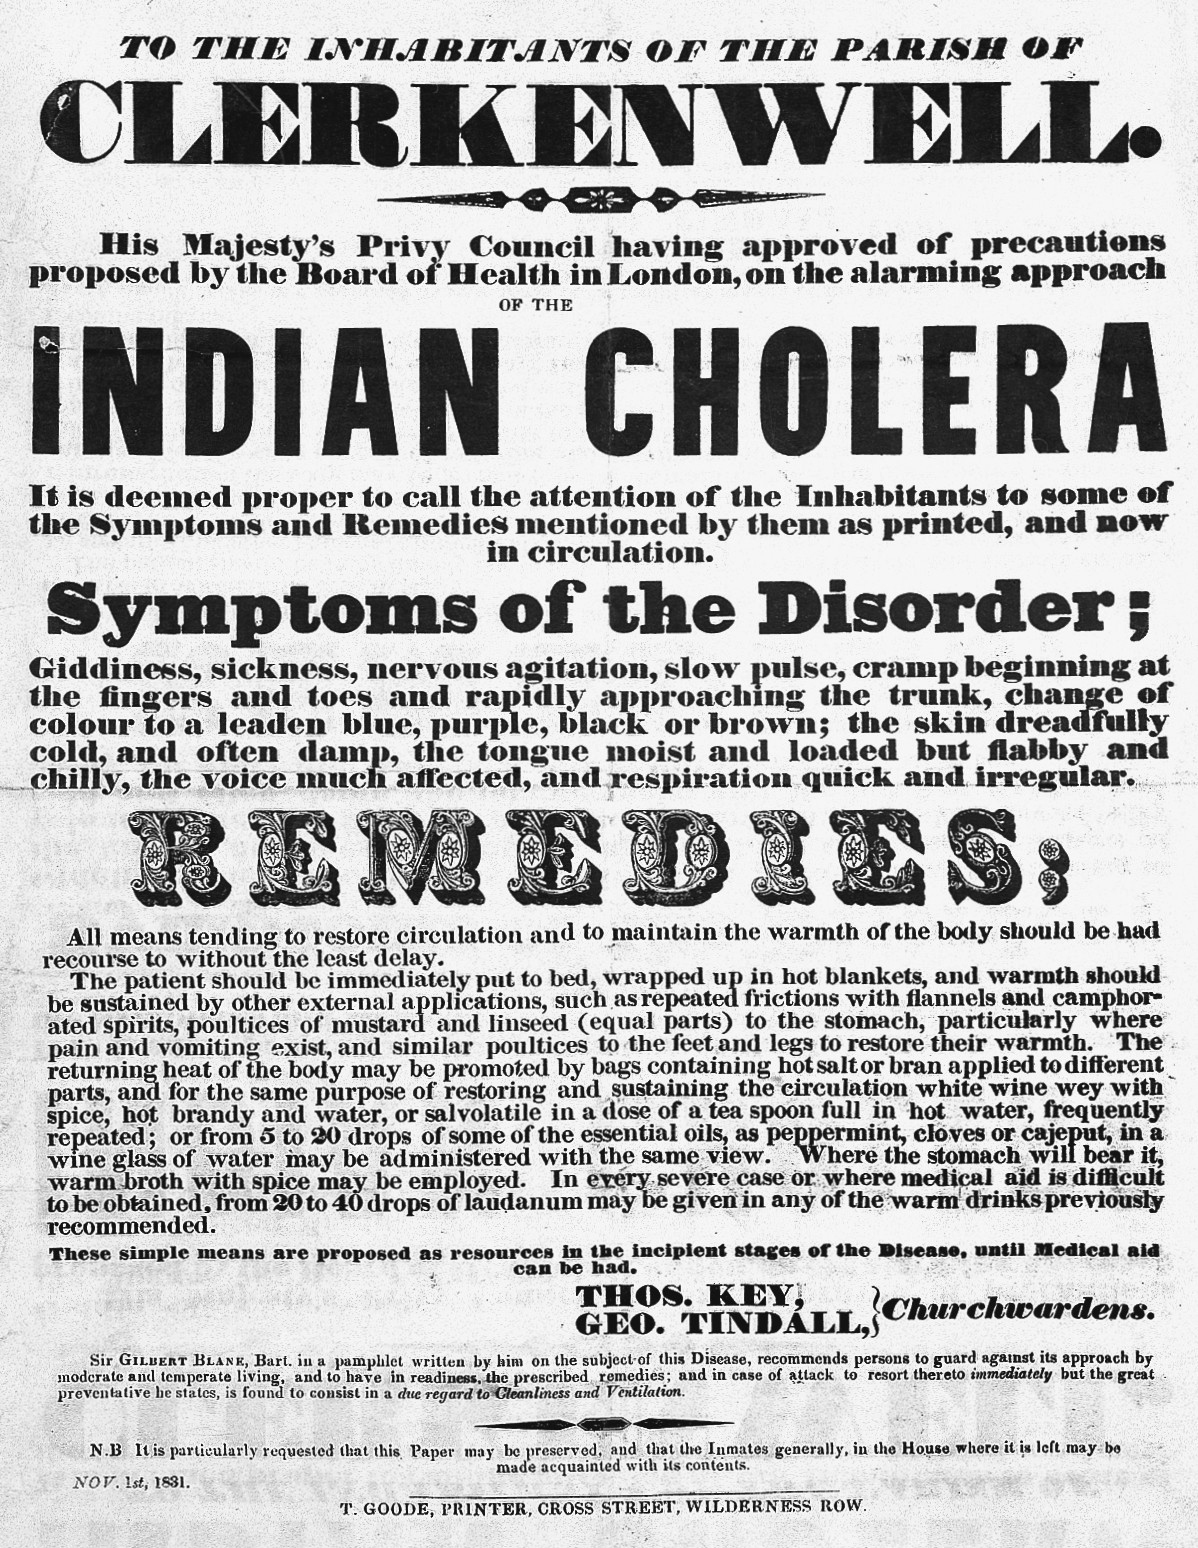 Poster warning of the “alarming approach” of what was described as “Indian” cholera, produced in London in 1831.